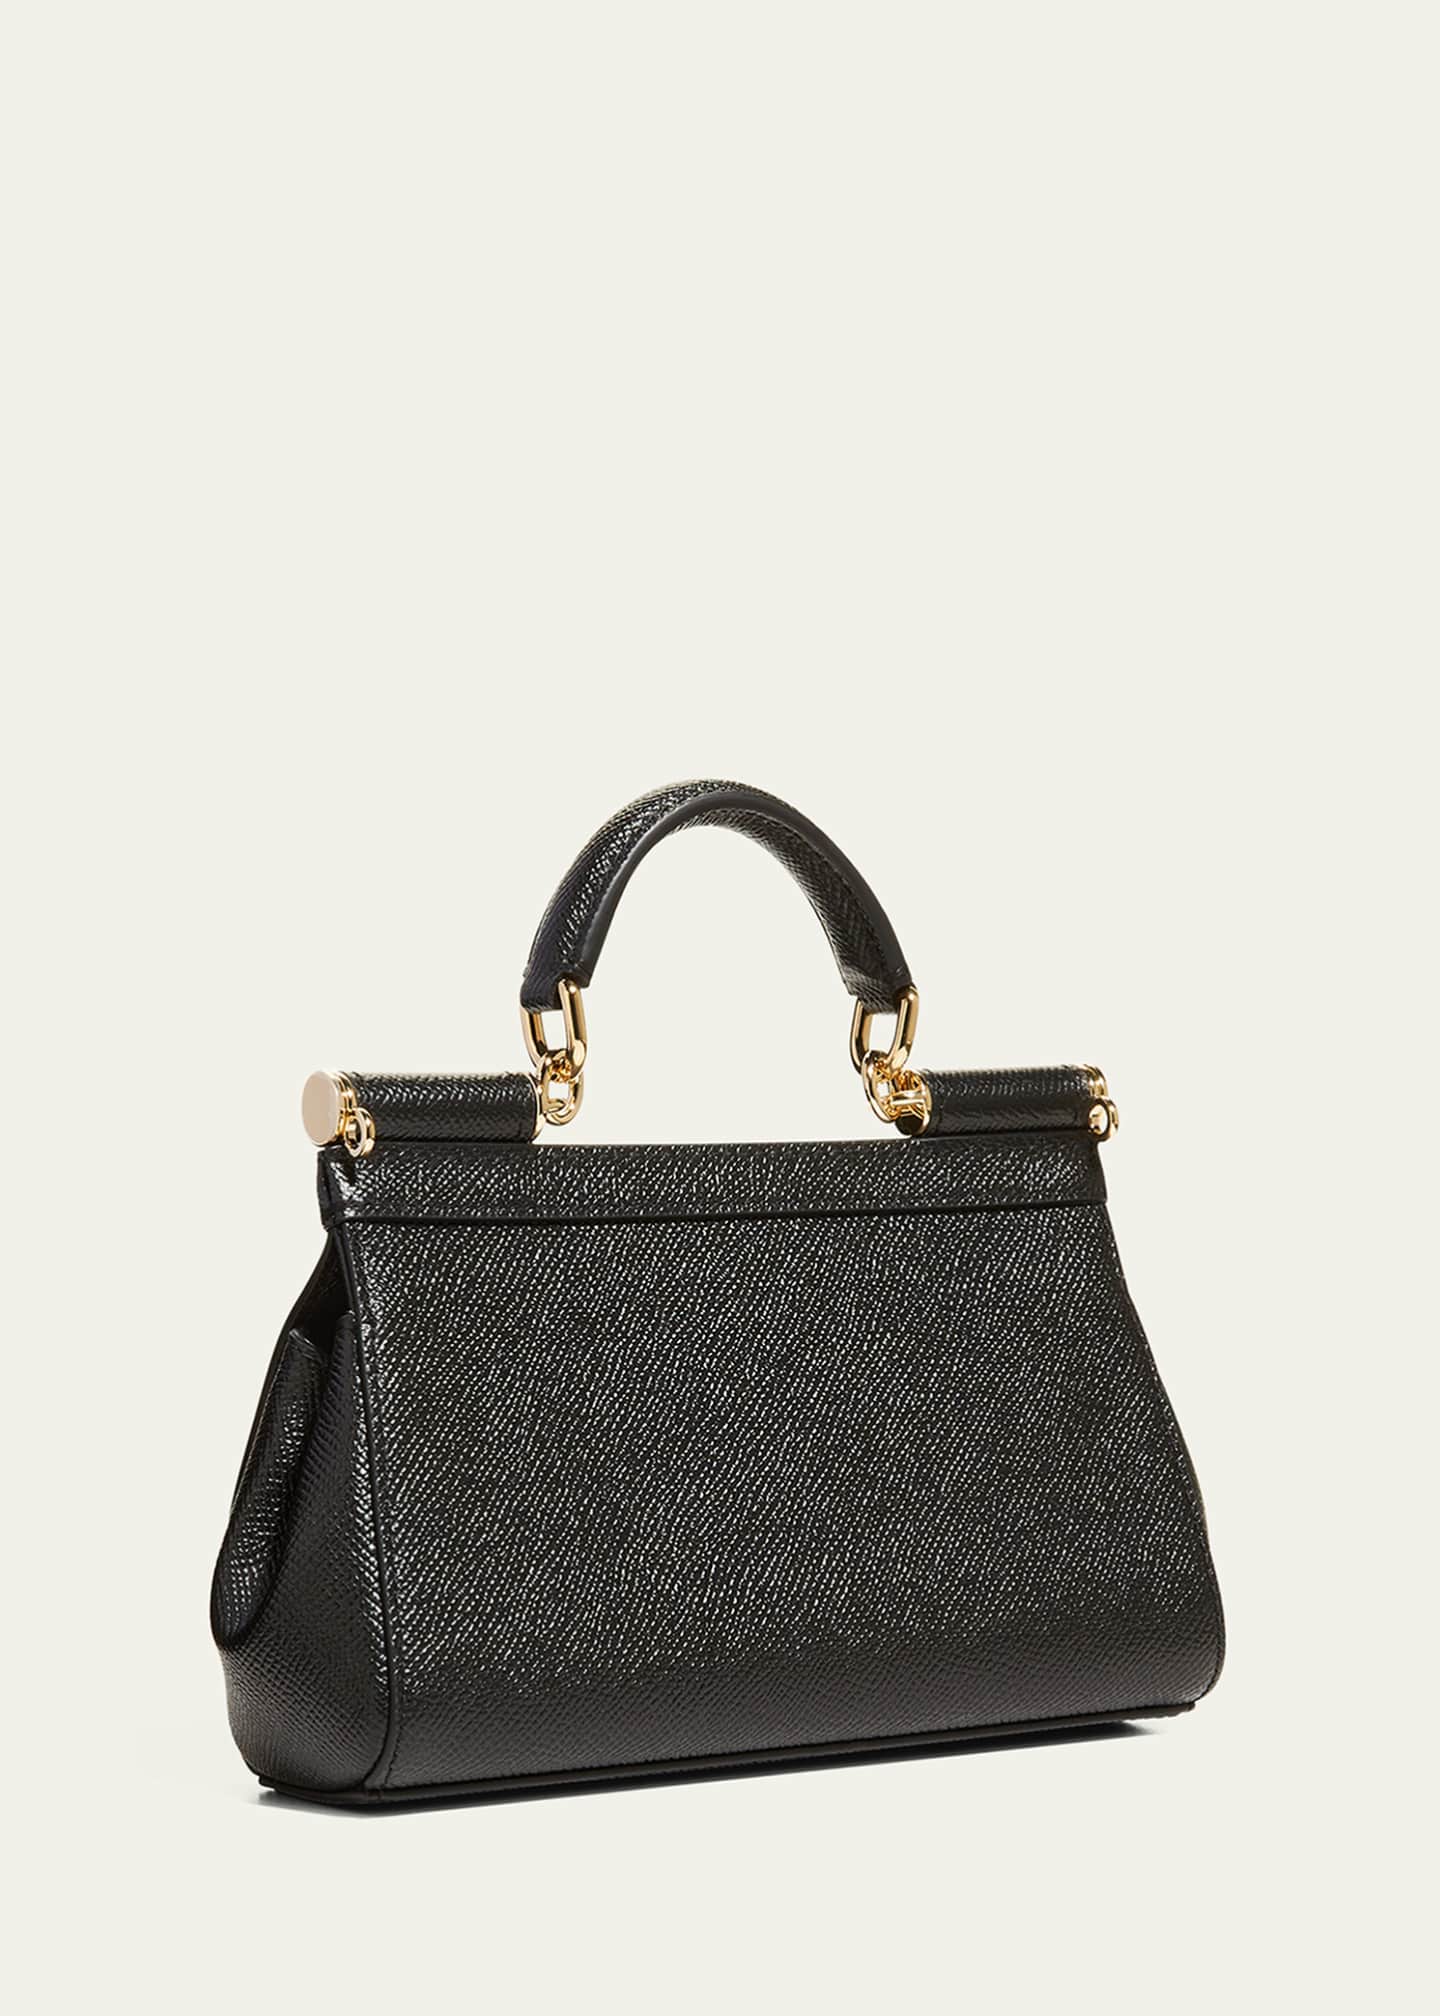 Dolce & Gabbana Sicily Small Leather Bag